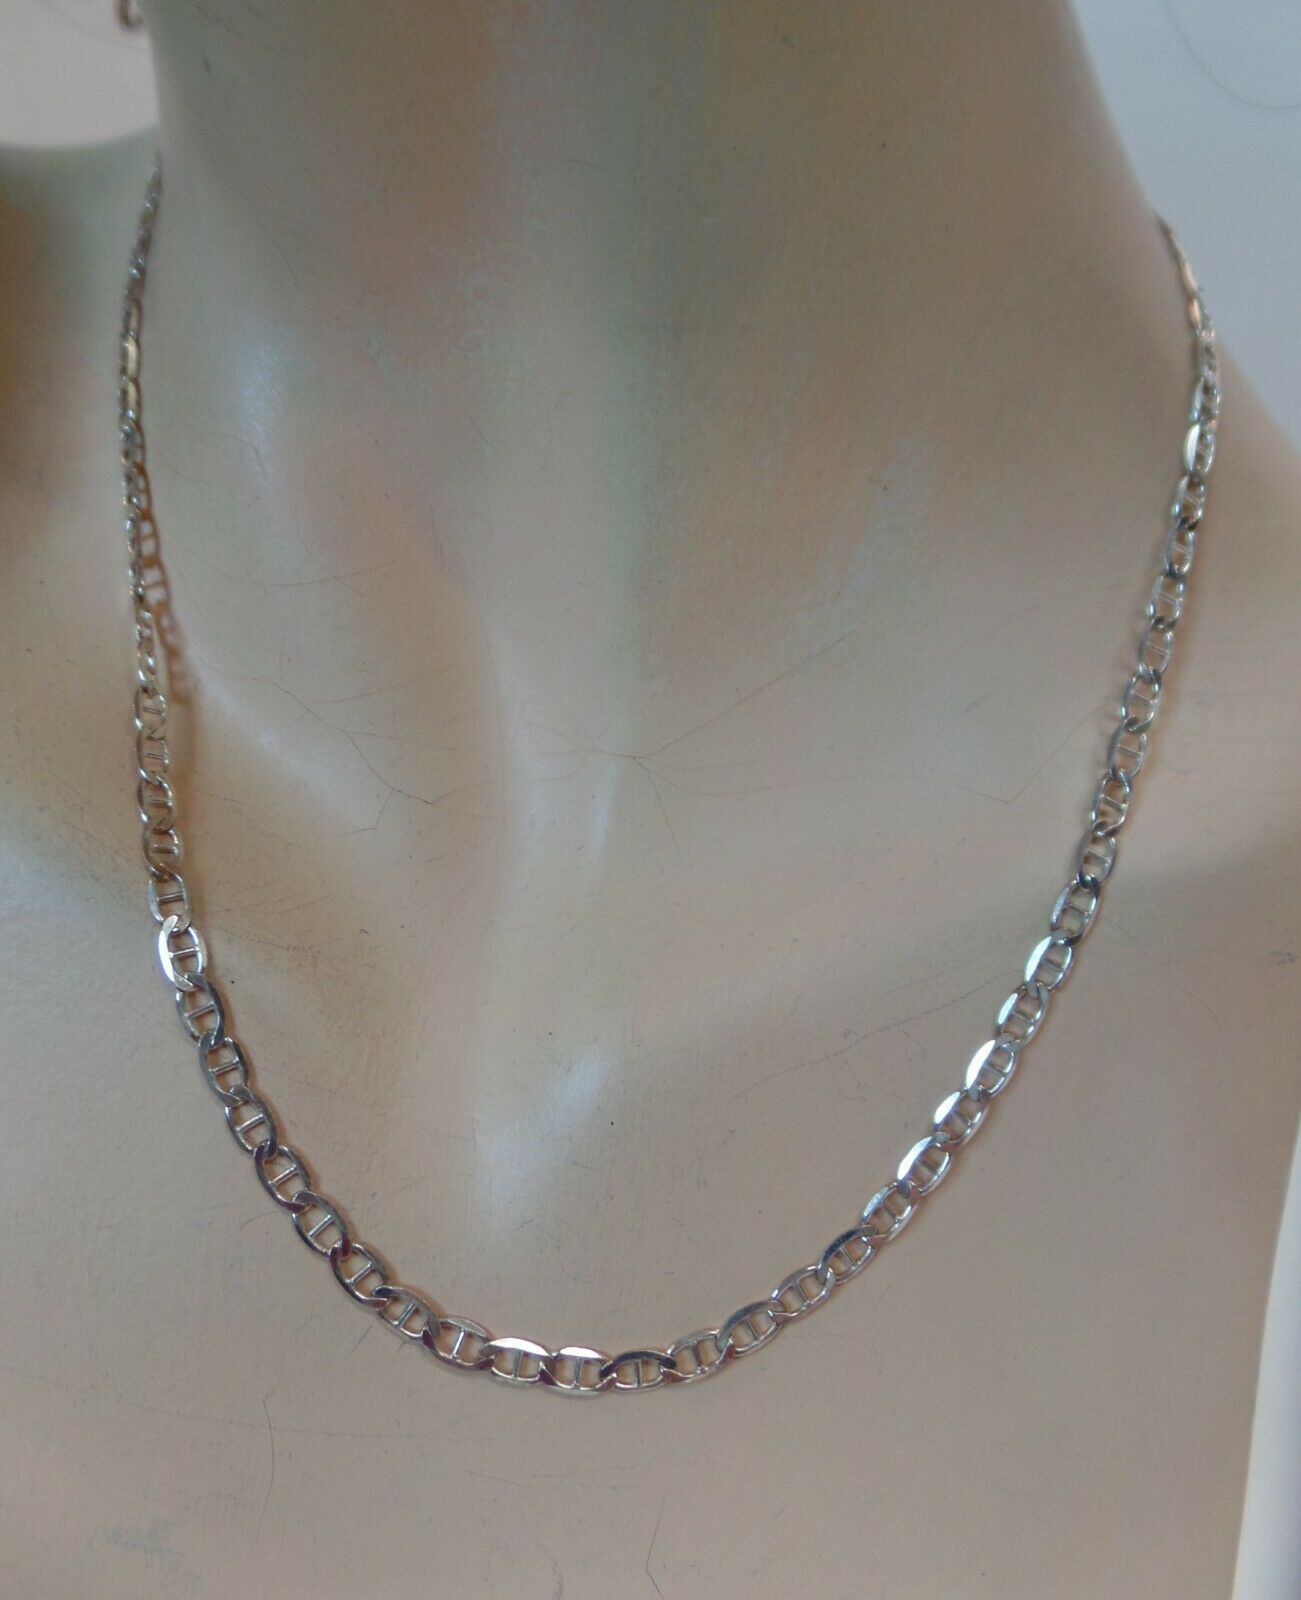 GB Sterling Silver 9.25 Mariner Link Chain 18" 7 Grams BNWT Retails 110.00 - $59.40